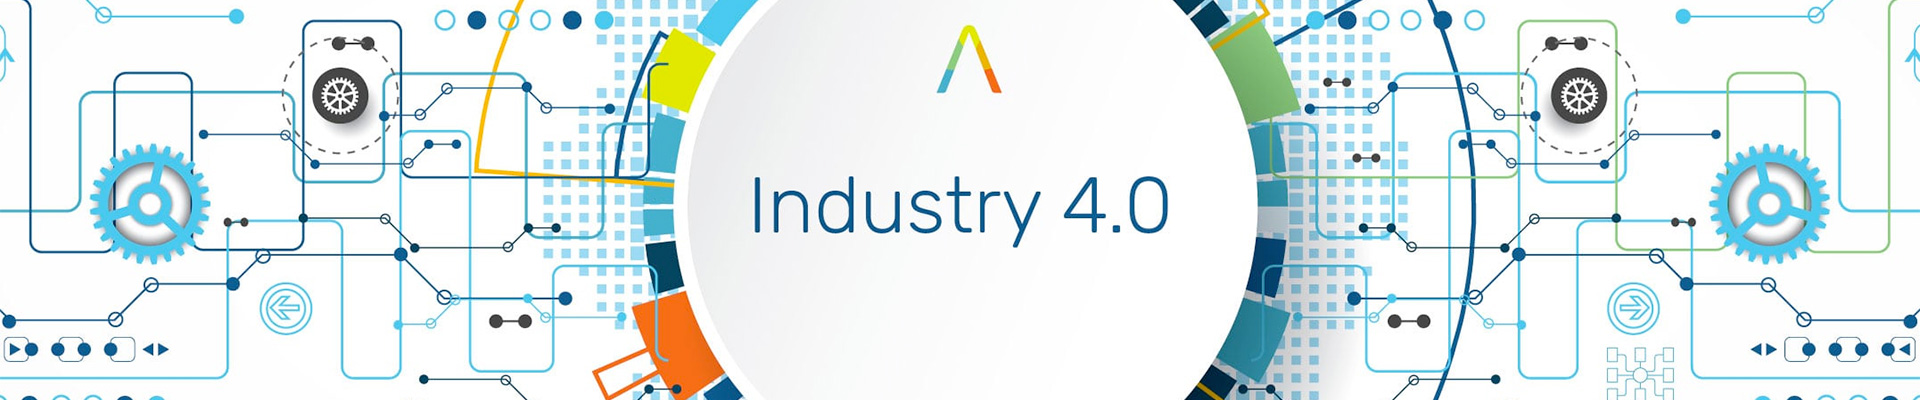 Industry 4.0 - S.E.I. S.r.l.